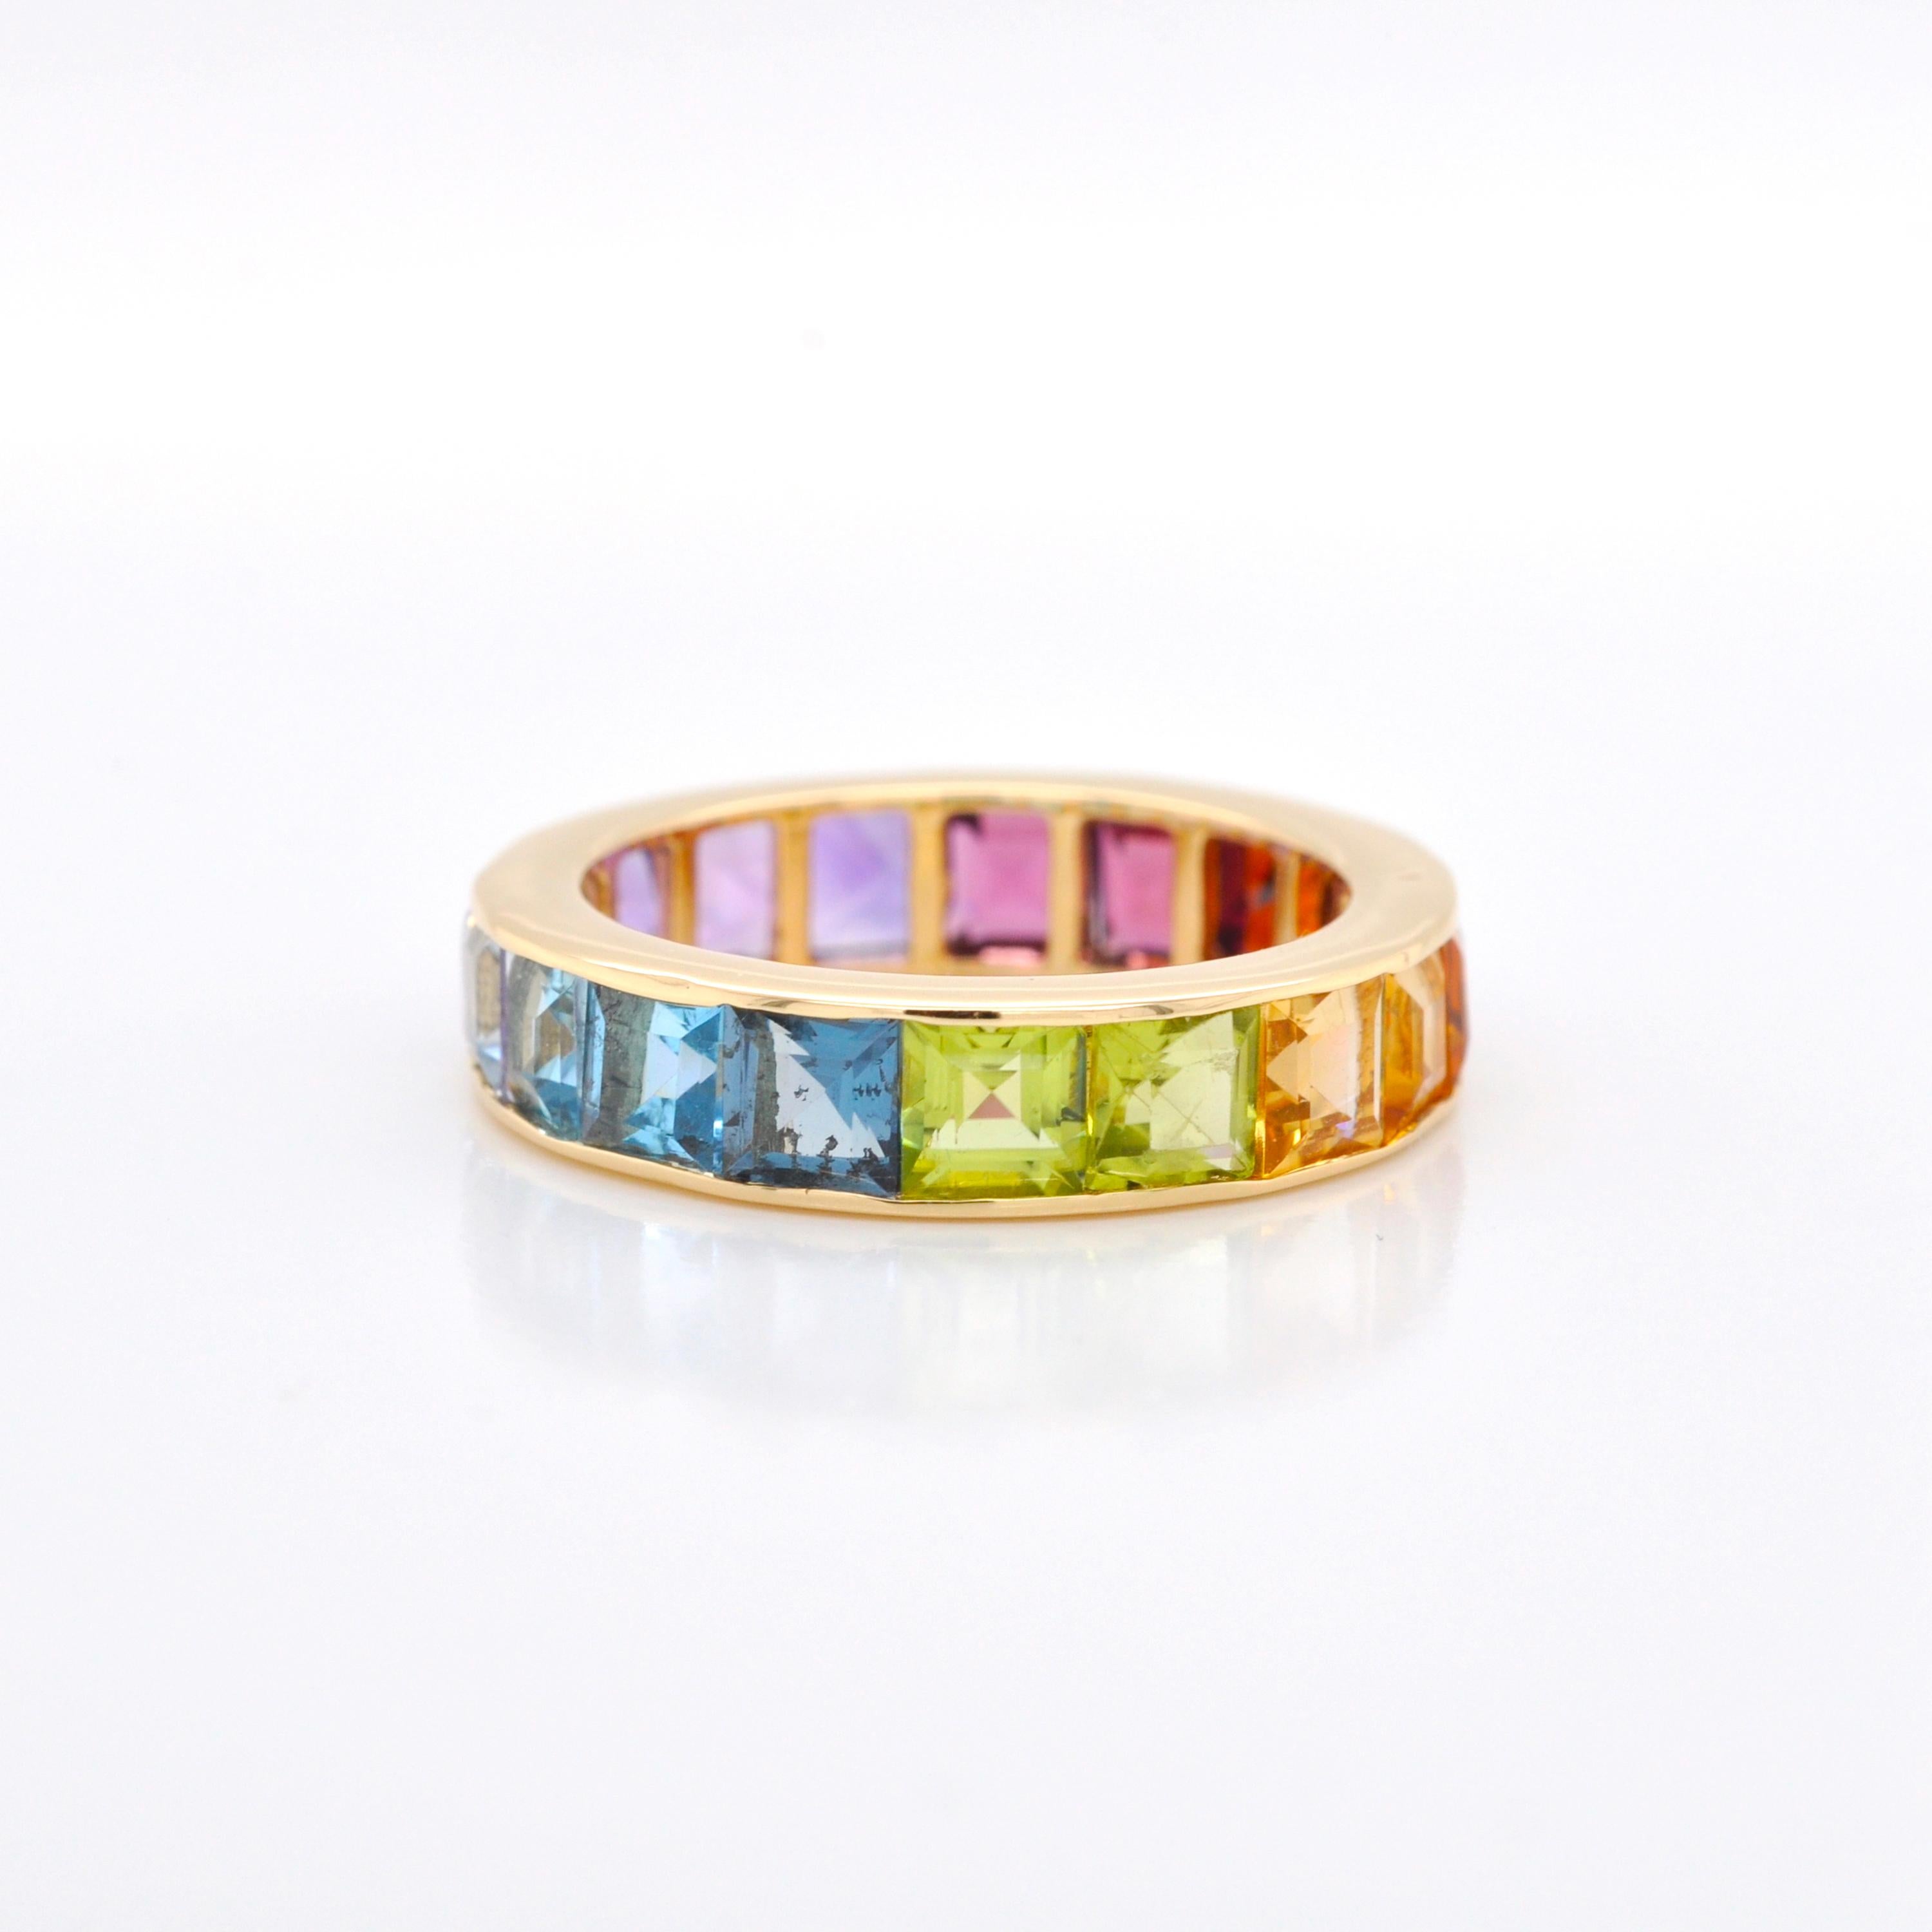 For Sale:  18K Gold Channel-Set 4 MM Square Rainbow Gemstones Eternity Band Ring 3